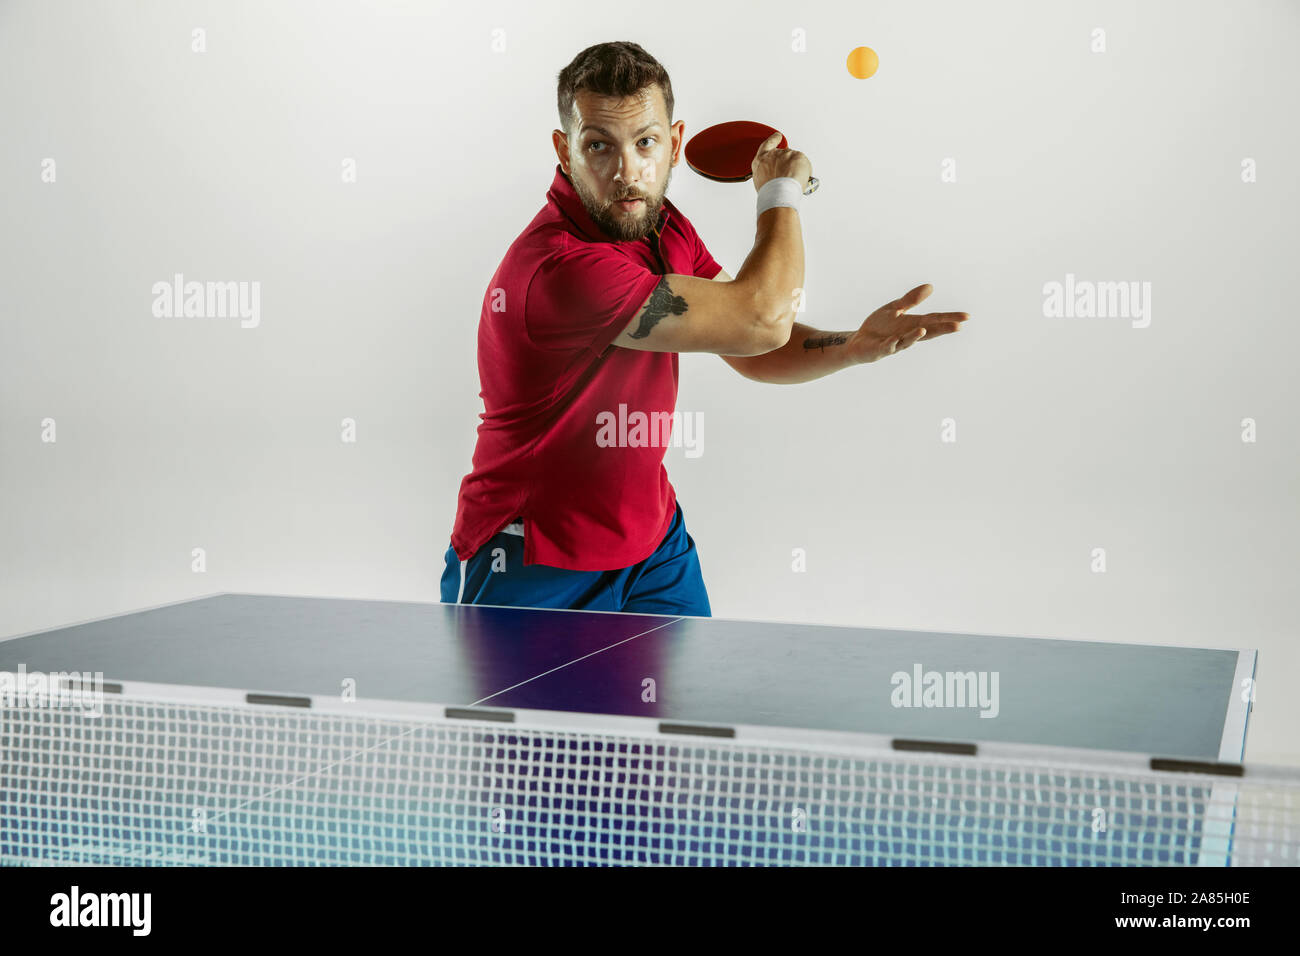 Overcoming. Young man plays table tennis on white studio background. Model  plays ping pong. Concept of leisure activity, sport, human emotions in  gameplay, healthy lifestyle, motion, action, movement Stock Photo - Alamy